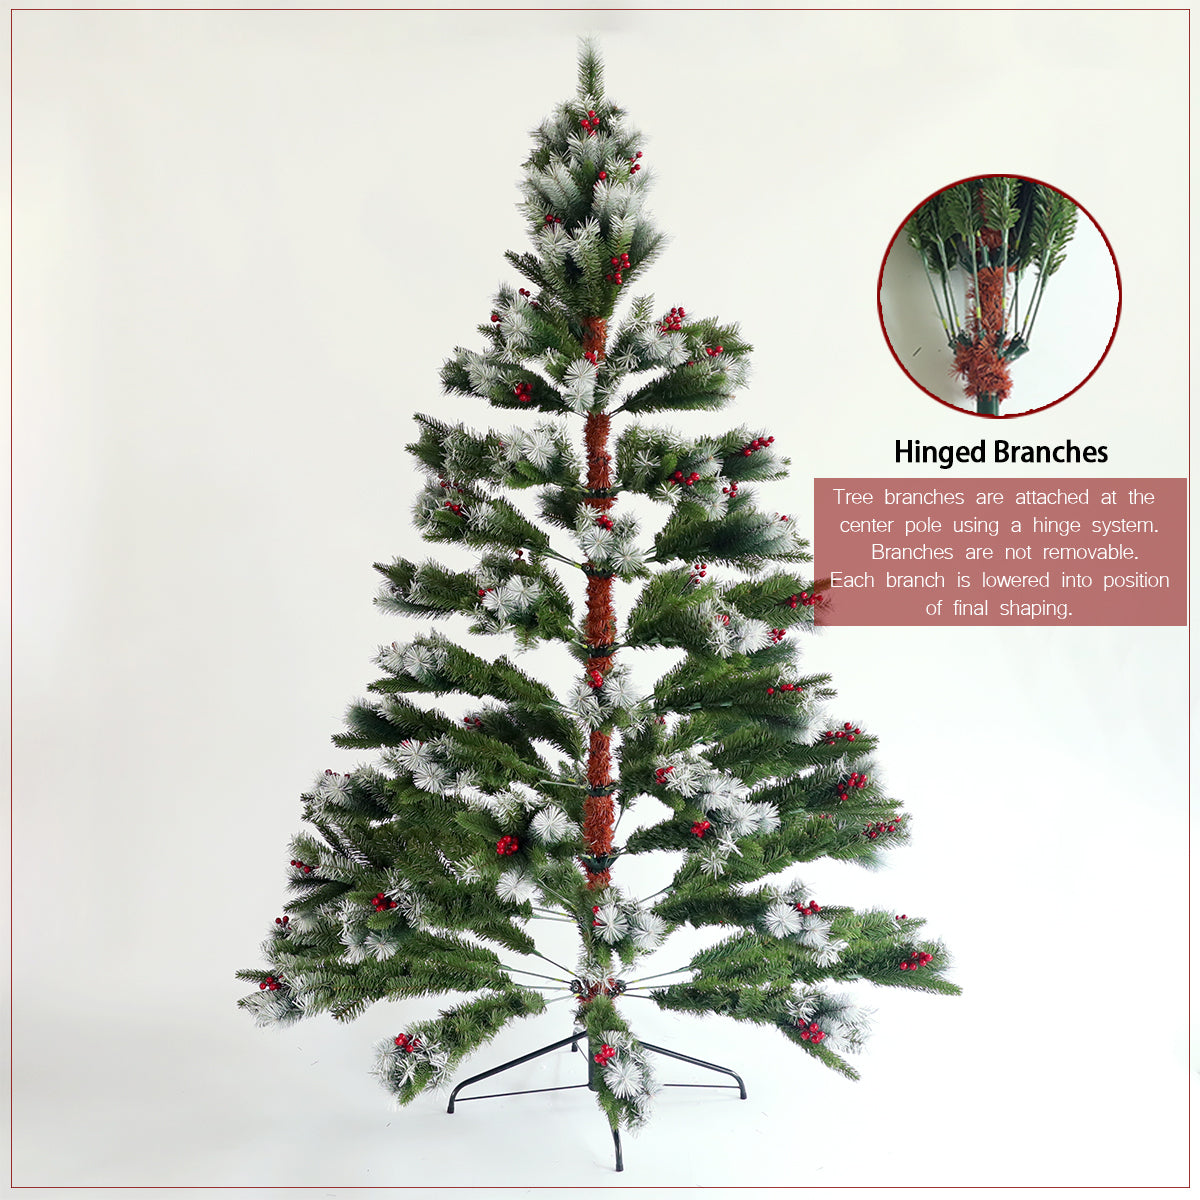 7.5ft Artificial Flocked Pine Needle Christmas Tree with Cones and Red Berries